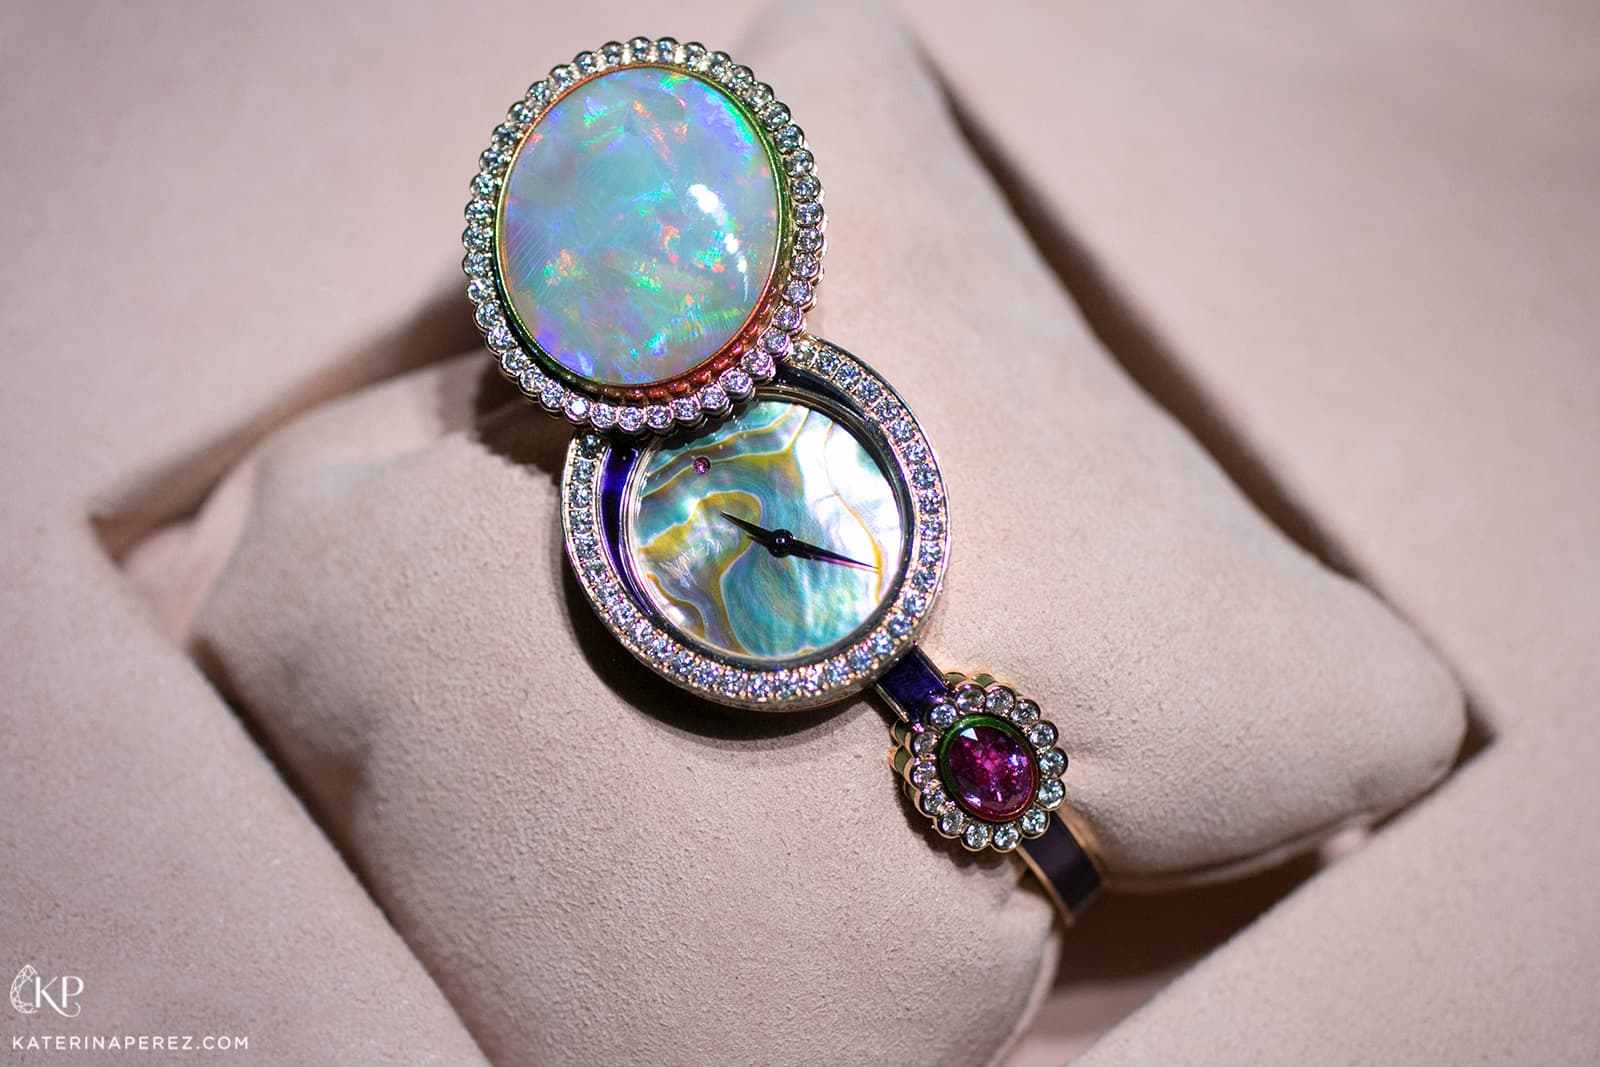 Dior et Moi collection secret watch with mother of pearl, opal, kunzite, diamonds and lacquer in white, yellow and pink gold